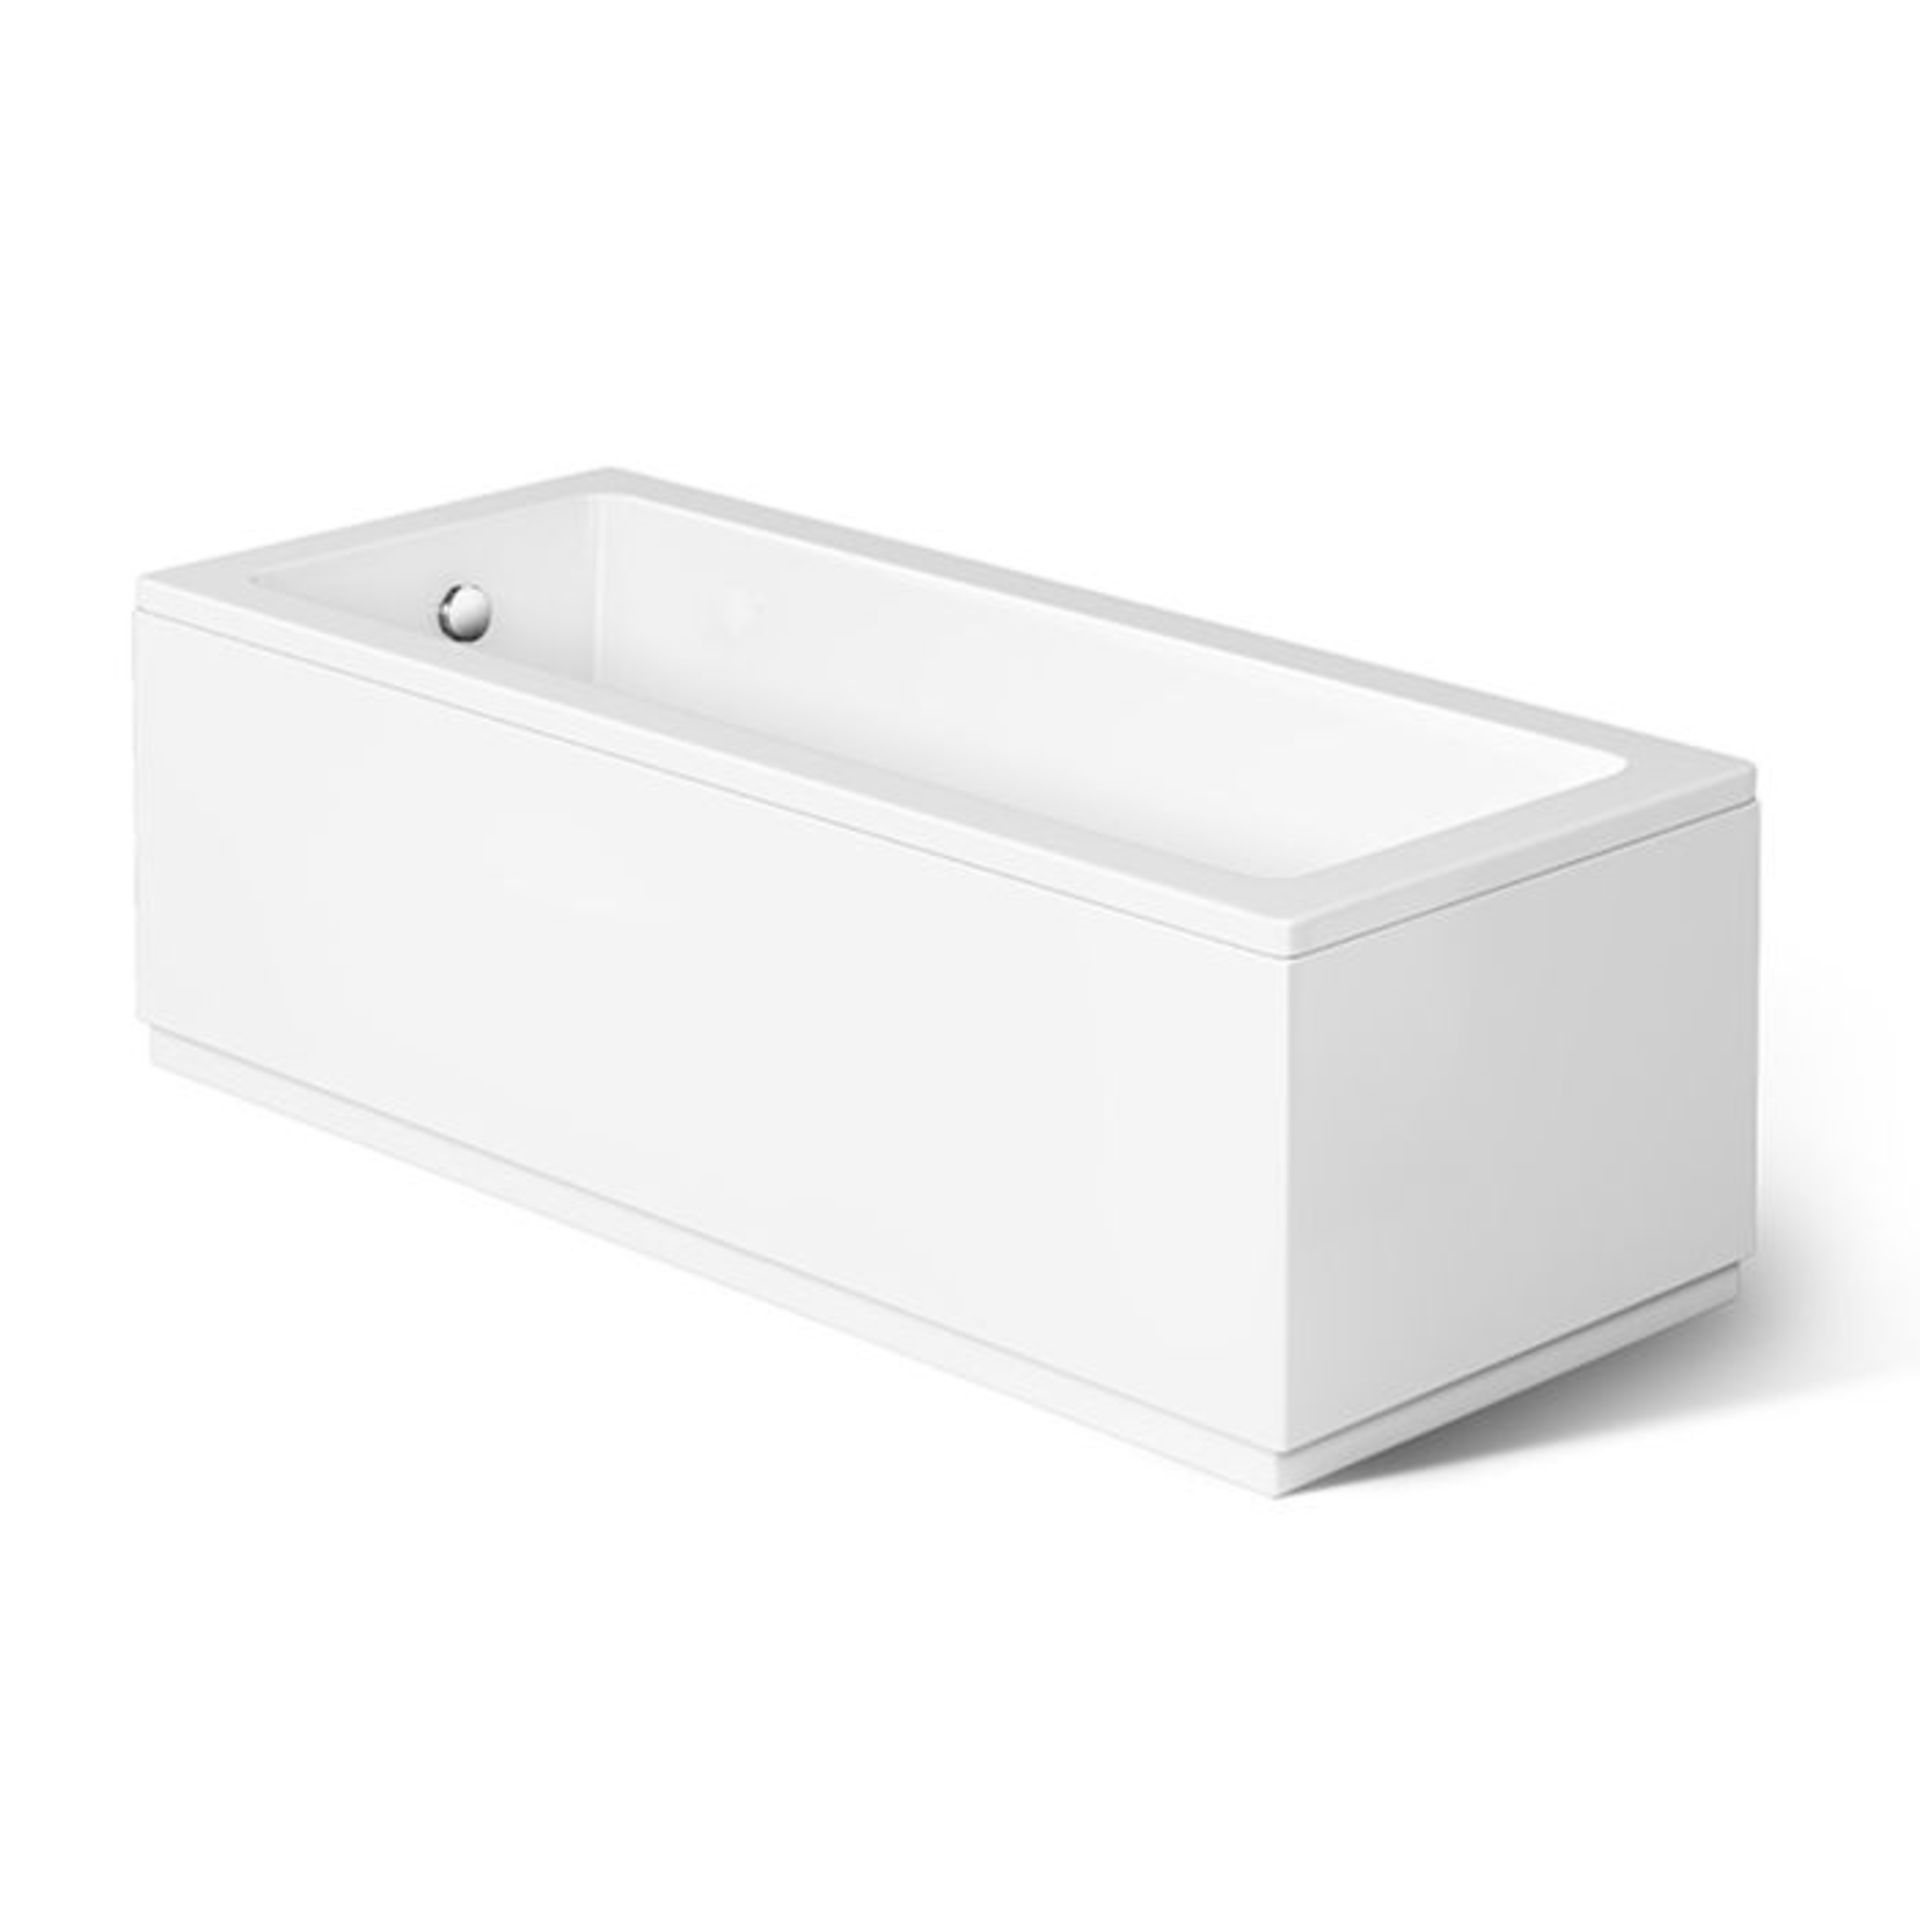 (KL82) 1700x700mm Square Single Ended Bath. COMES COMPLETE WITH SIDE PANEL. Space saving design